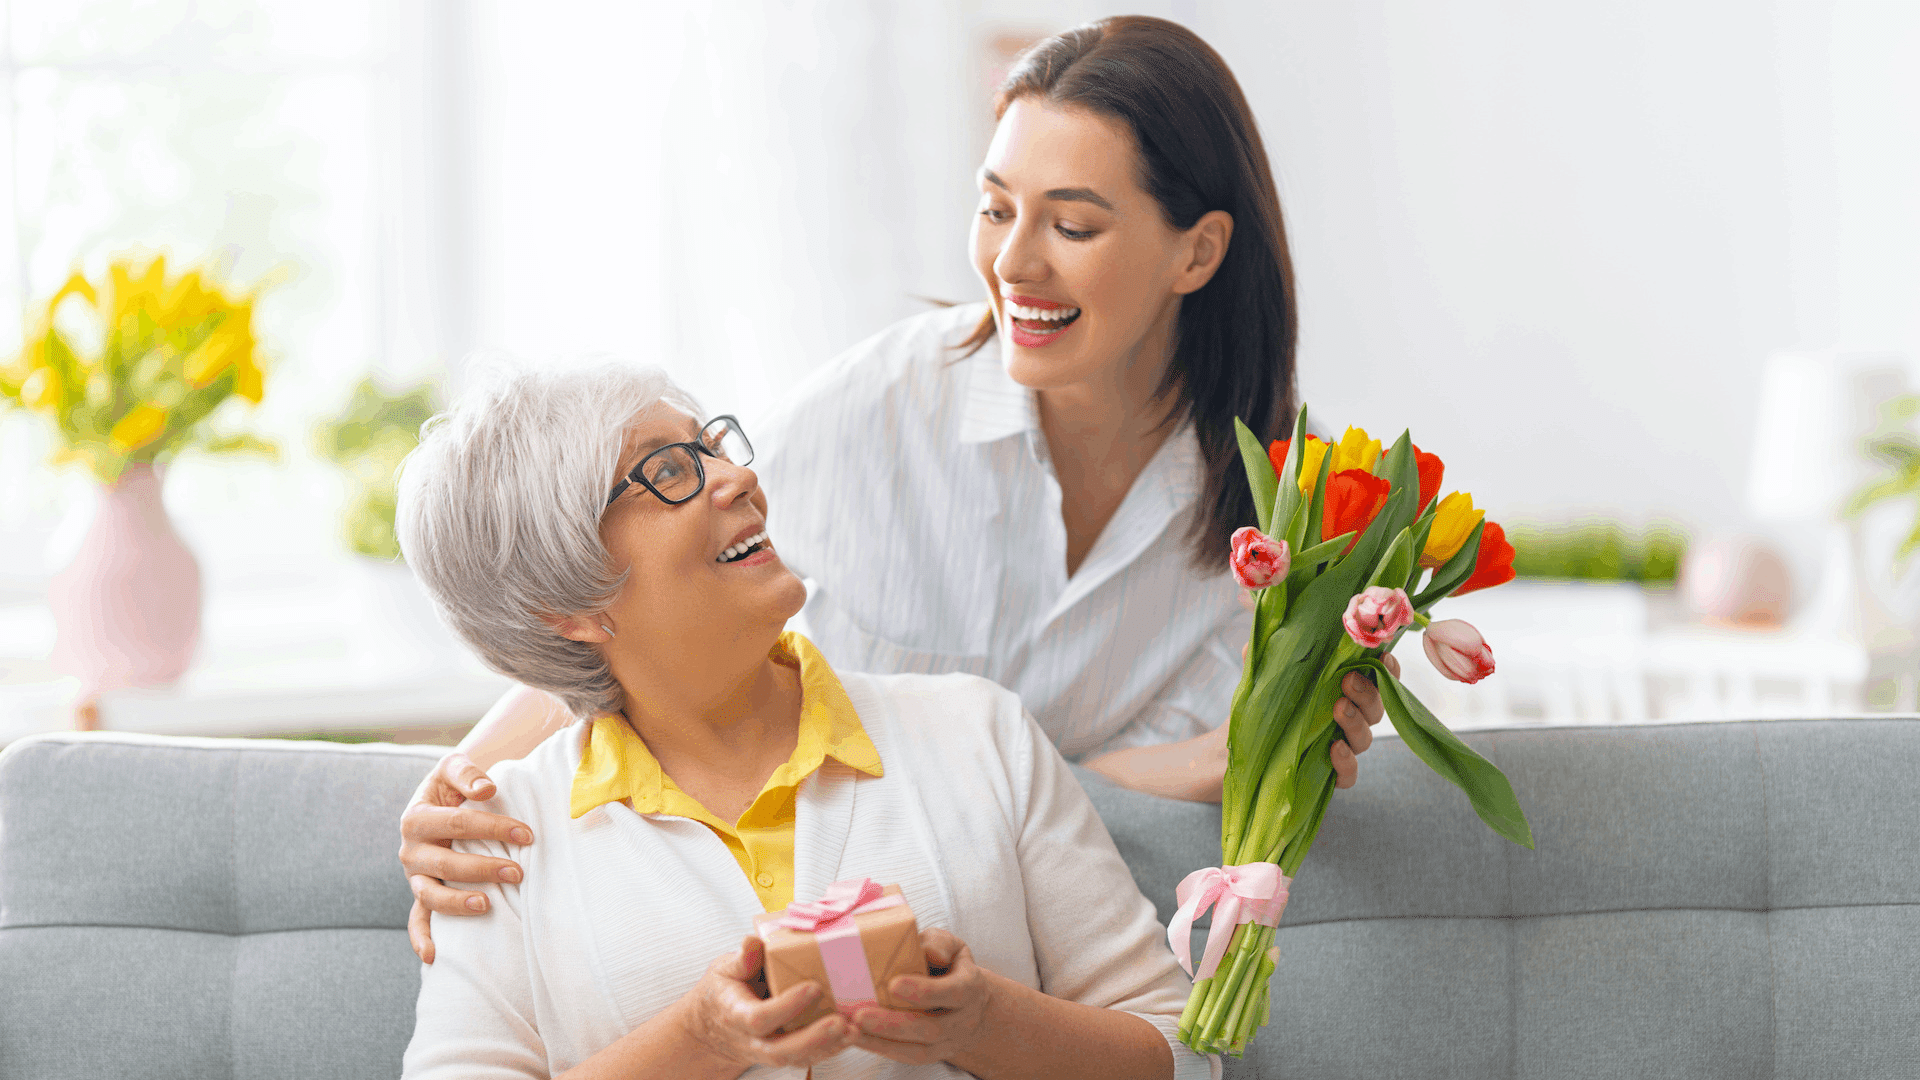 Mother holding gift and Daughter holding flowers looking at each other